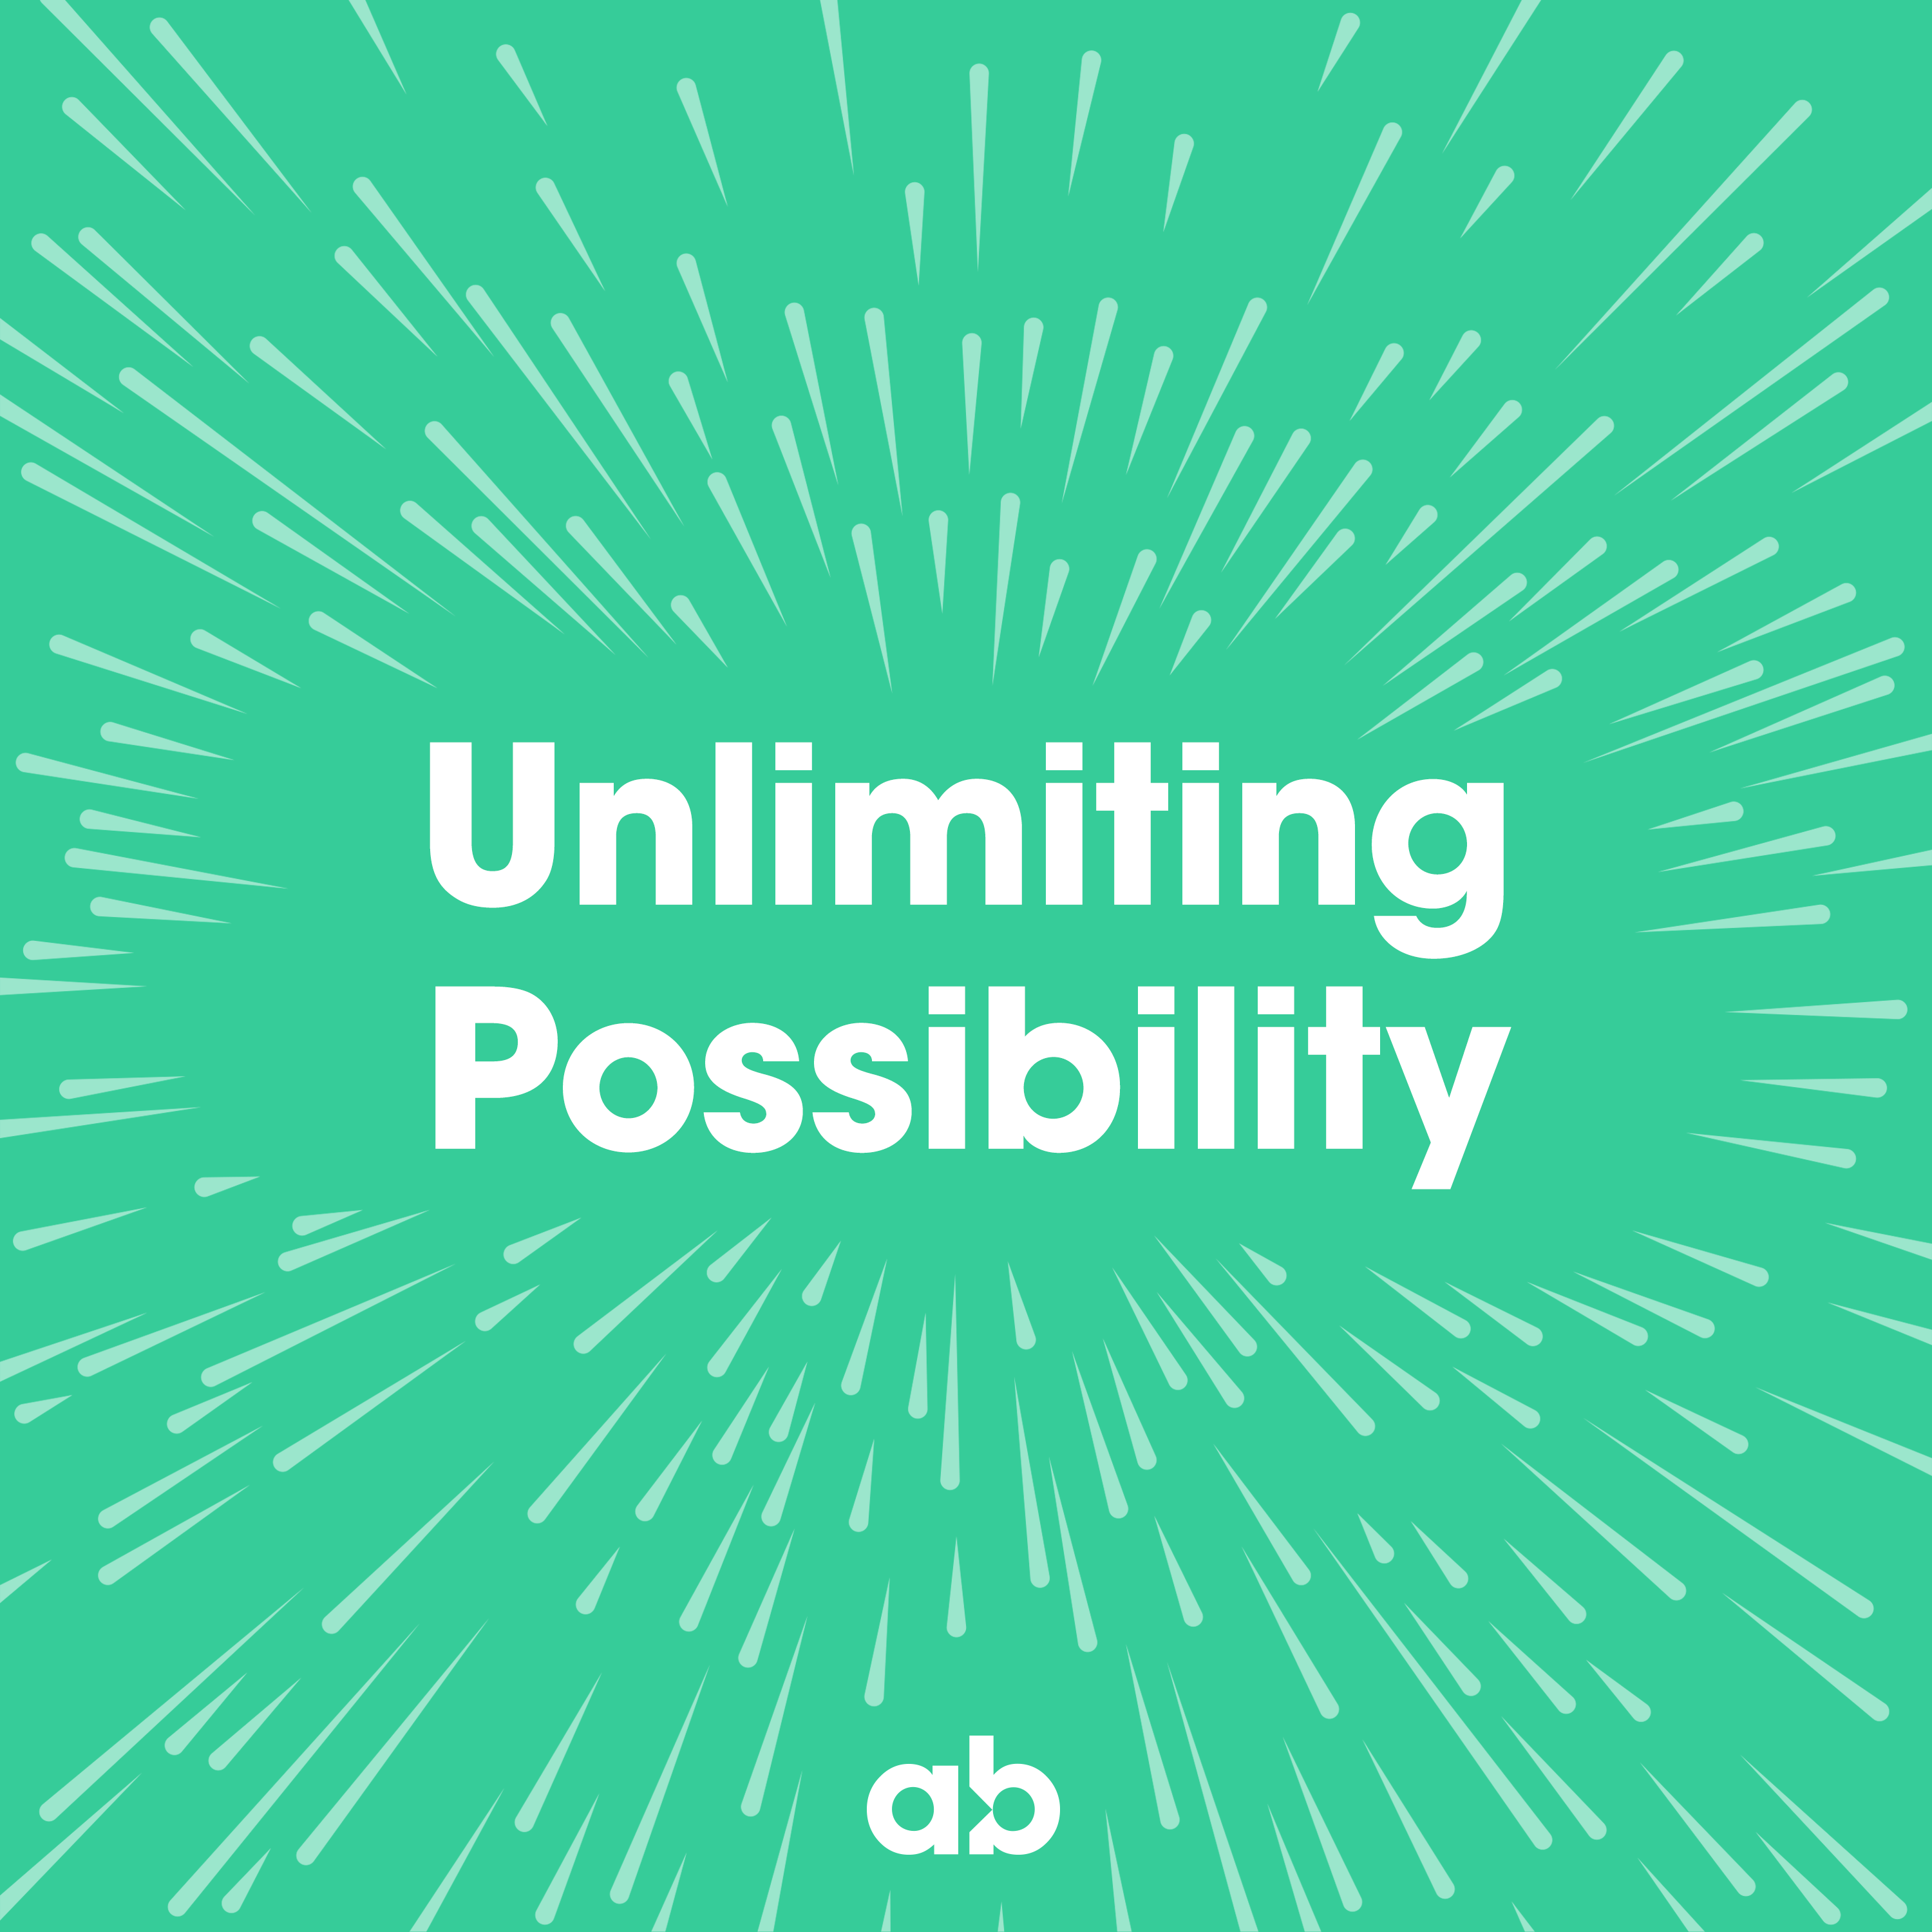 Ep2. From limited to unlimited possibility - with Stephen Carver